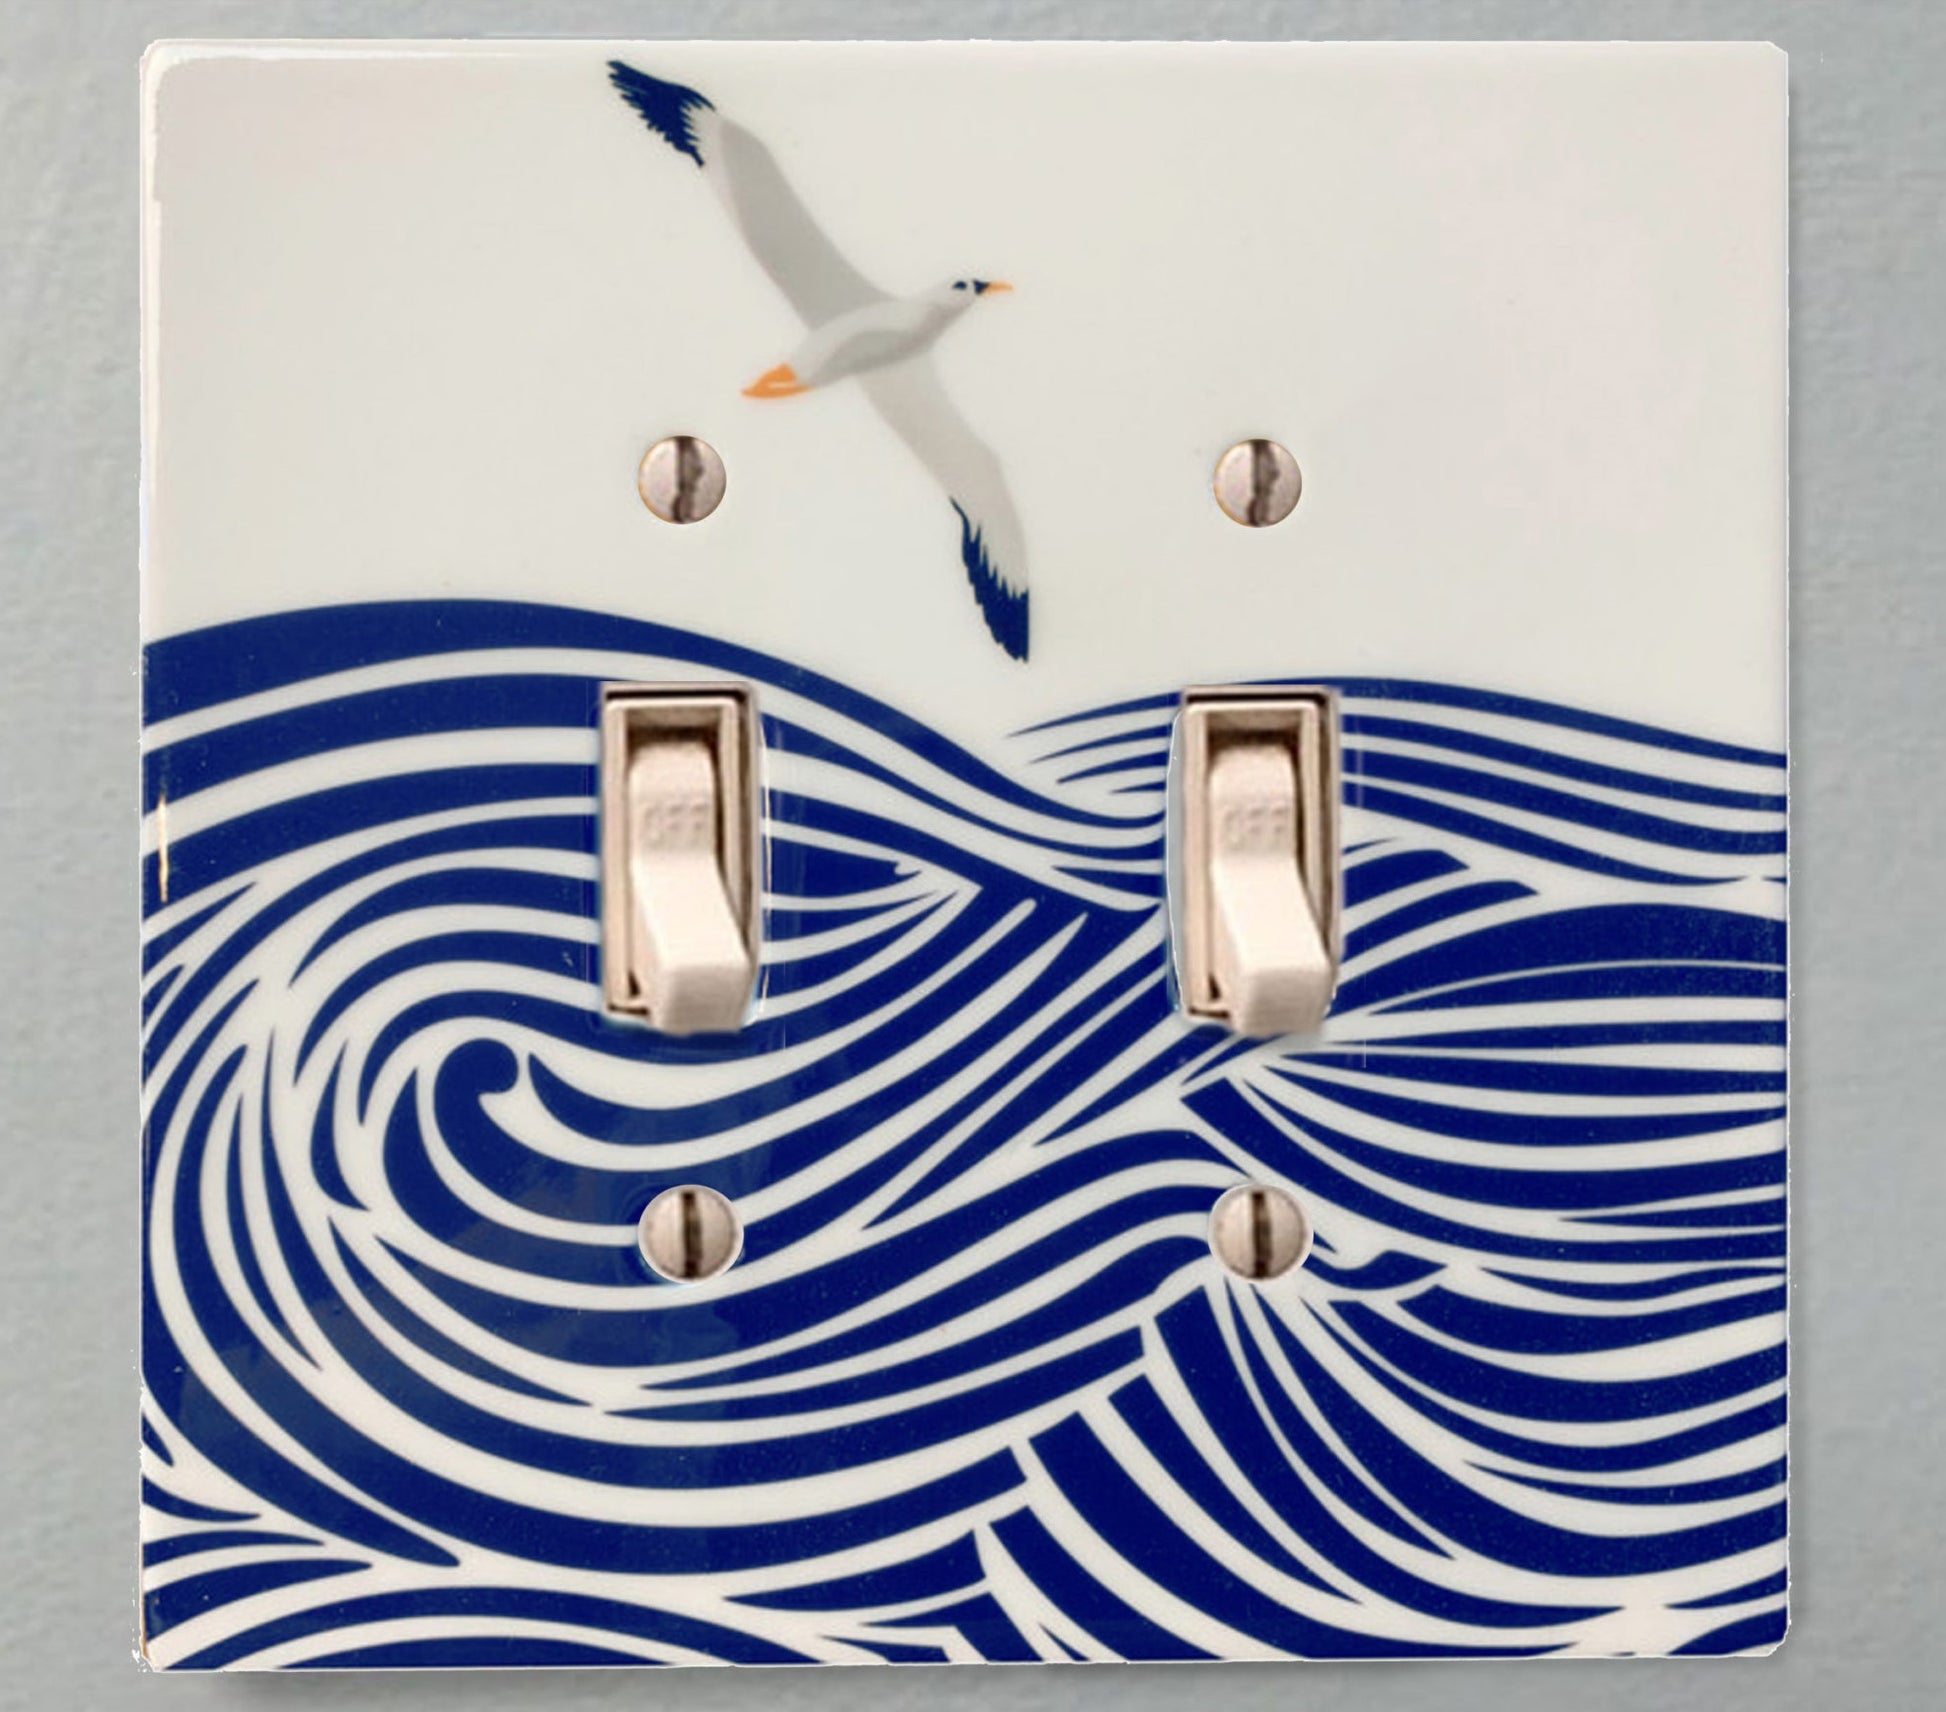 ceramic double toggle switchplate featuring illustration of albatross flying above waves.